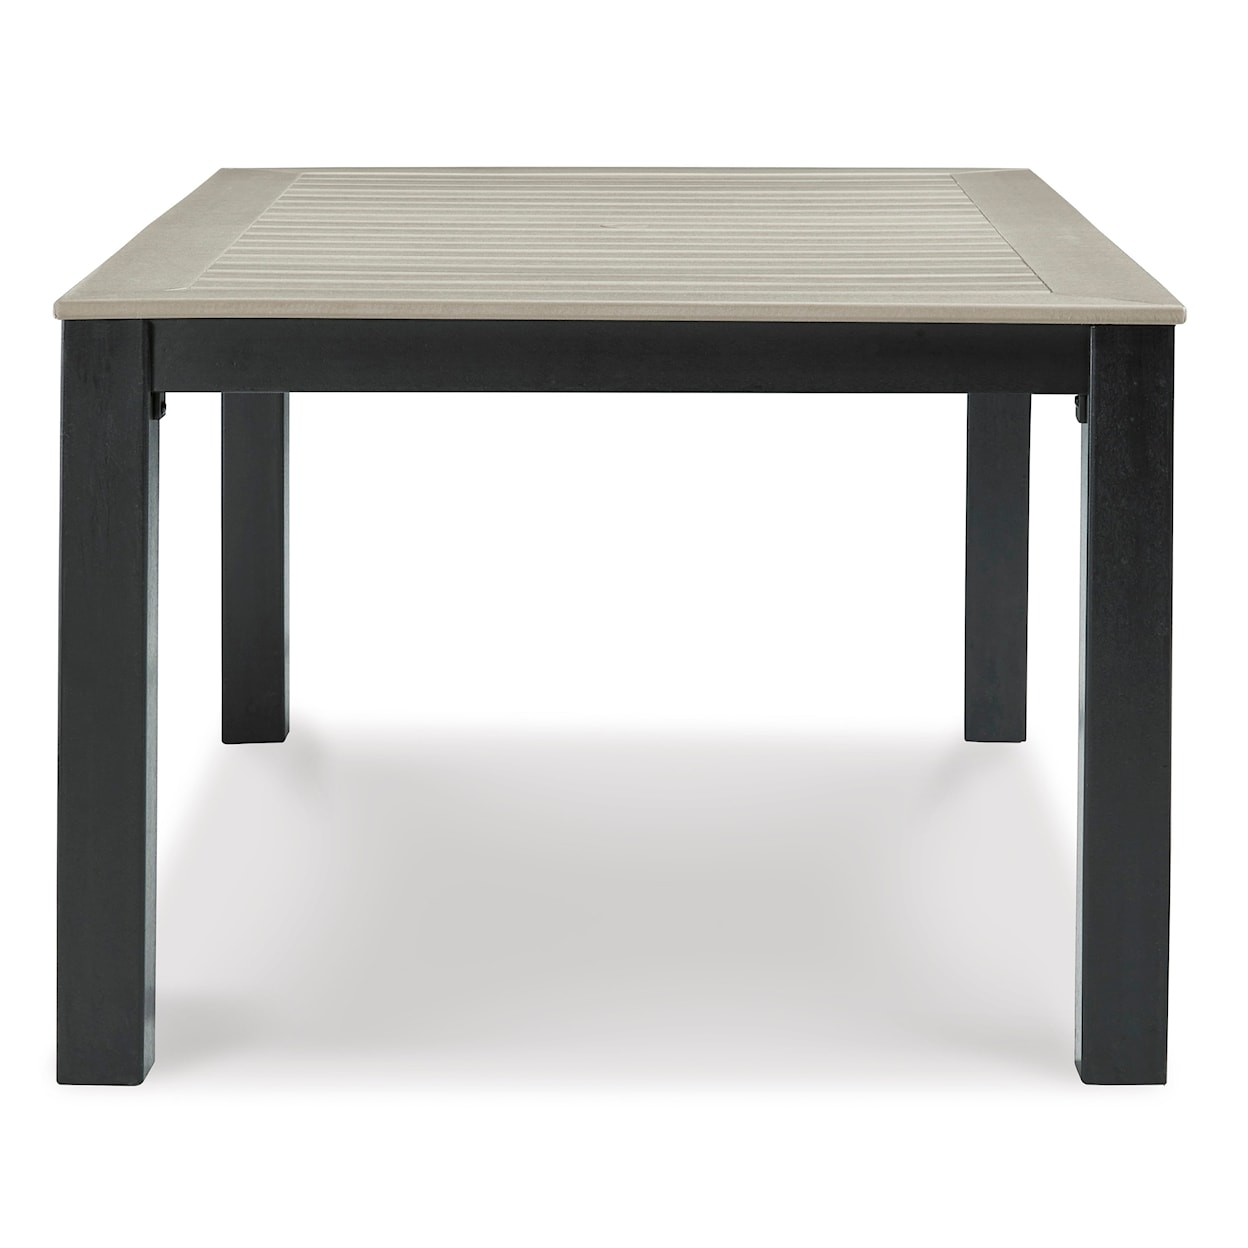 Signature Mount Valley Outdoor Dining Table